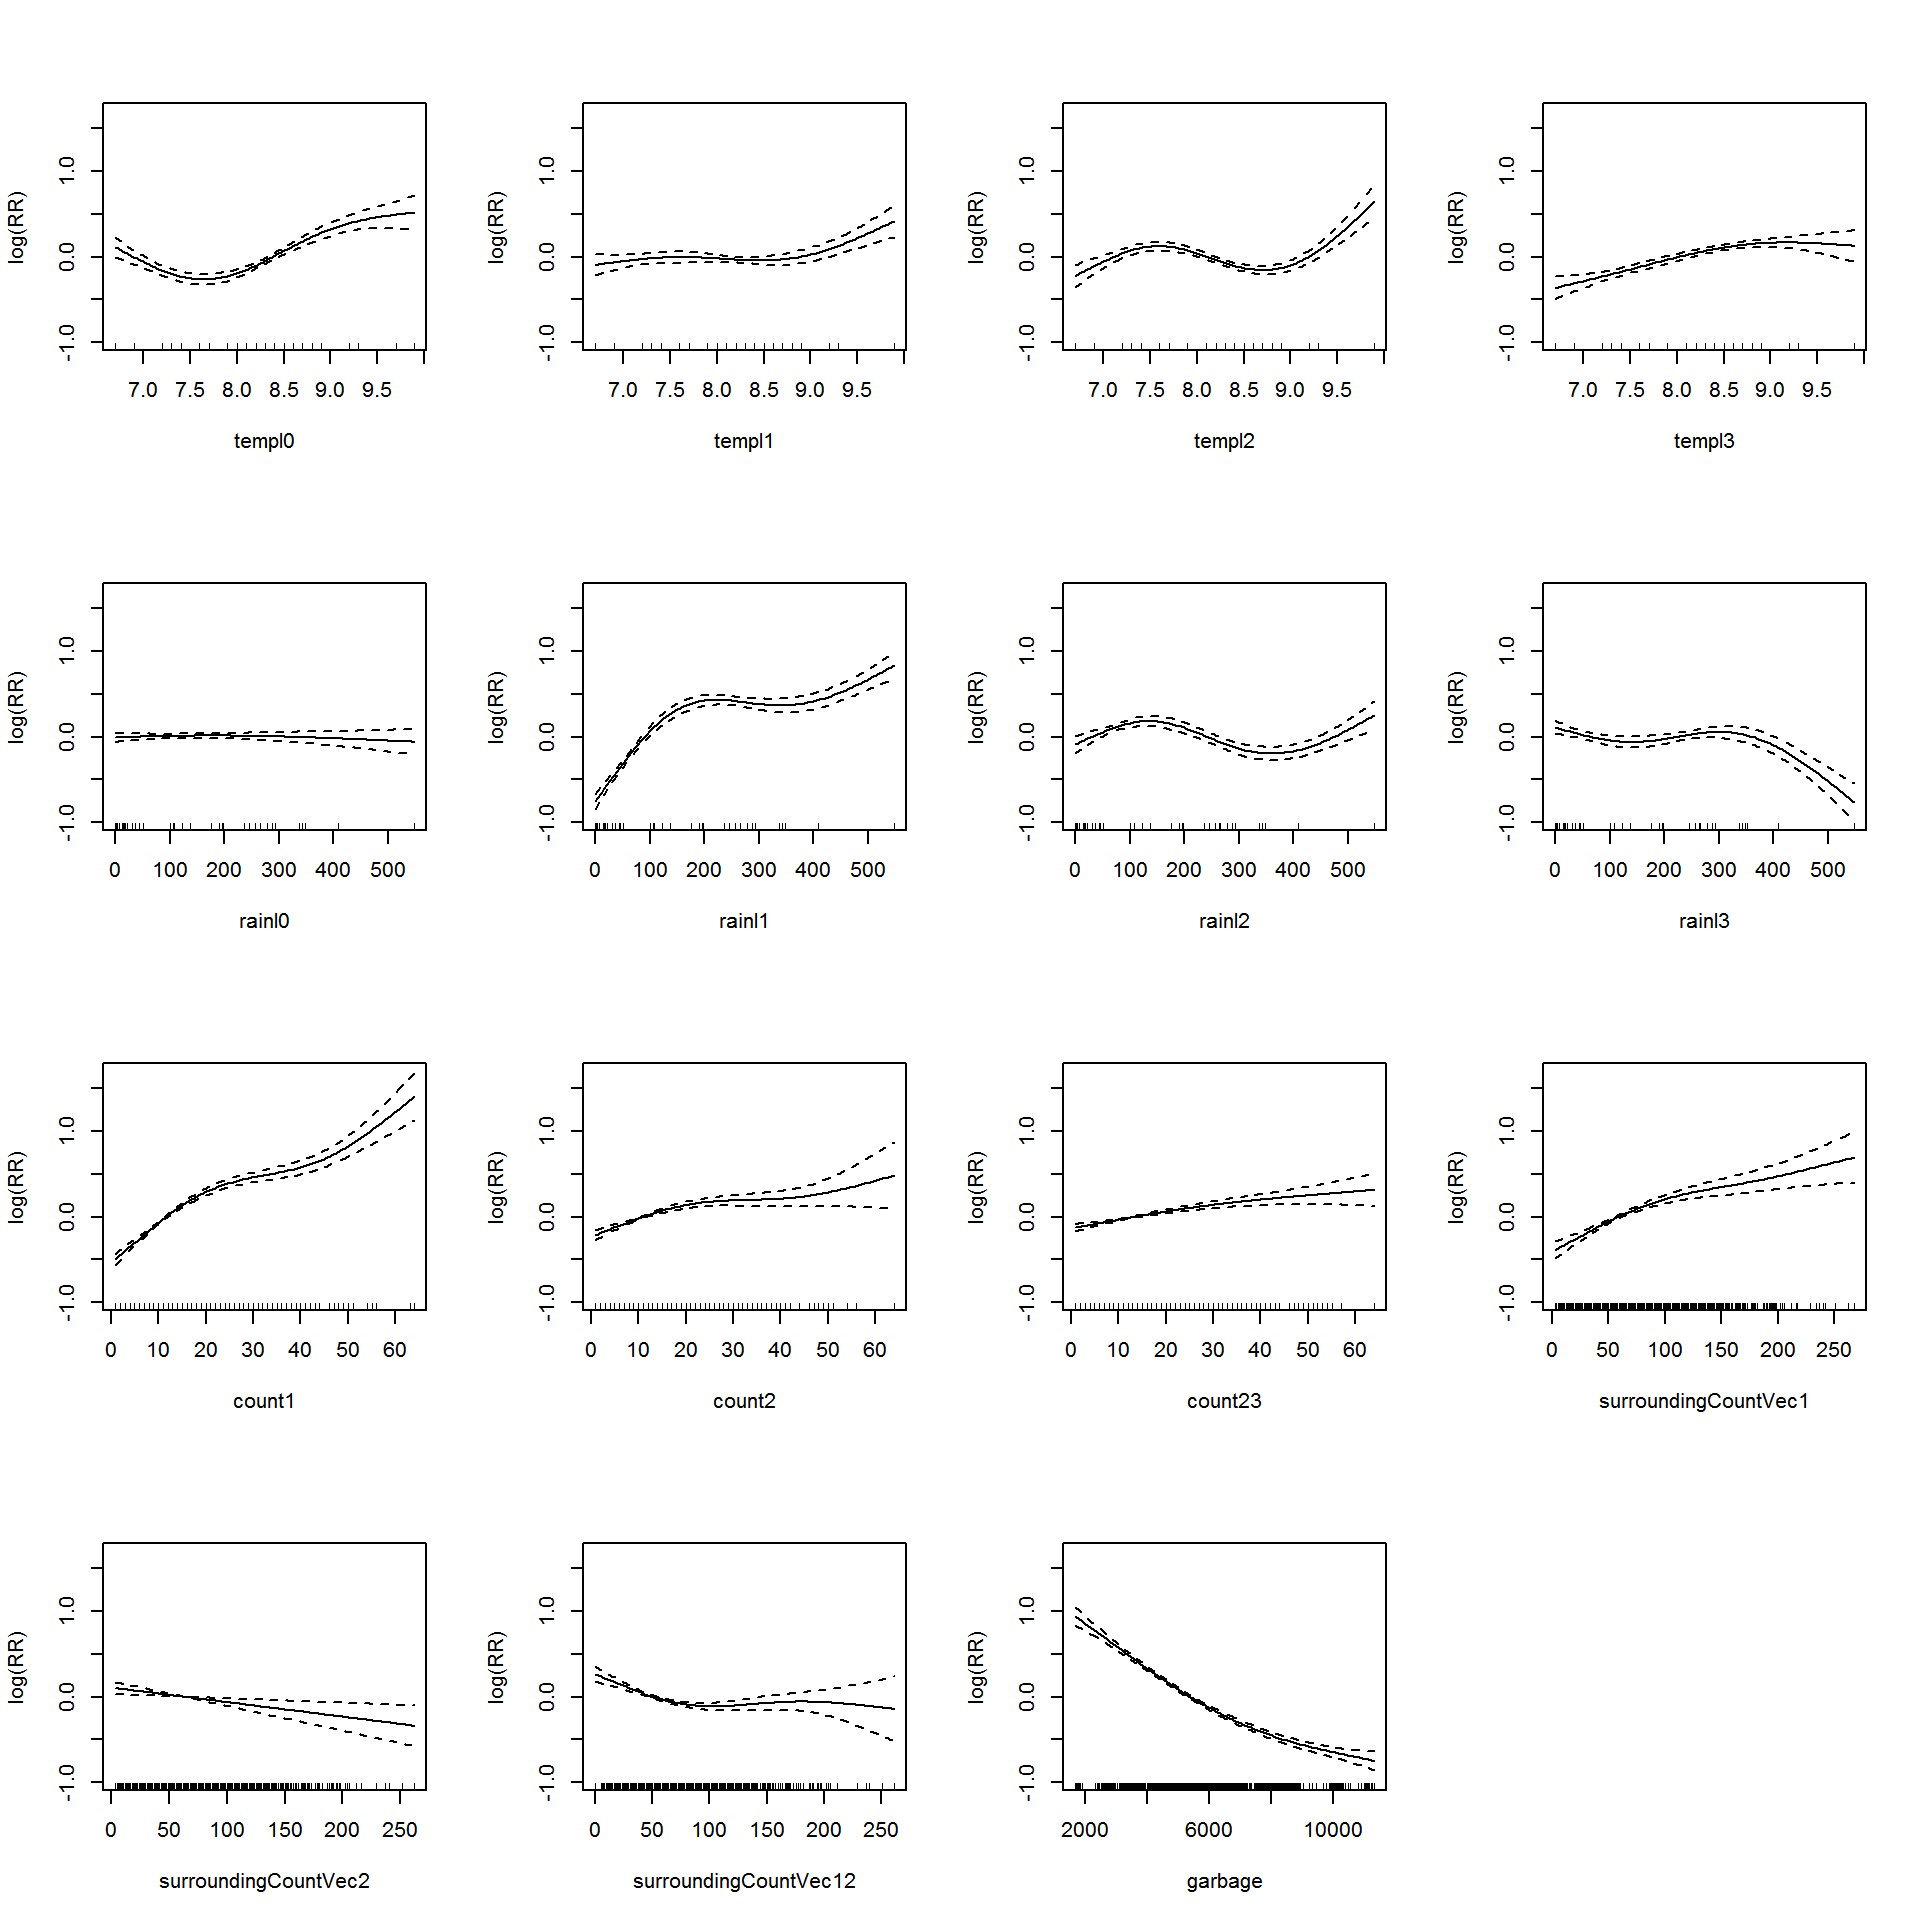 **Association between the meteorological variables, past dengue count over optimal lags within 1-30 months, surrounding district count over 0-30 months, garbage data and the dengue outbreak.**. Solid lines represent relative risks (RR) of dengue cases and dottted lines depict the upper and lower limits of 95% confidence intervals.